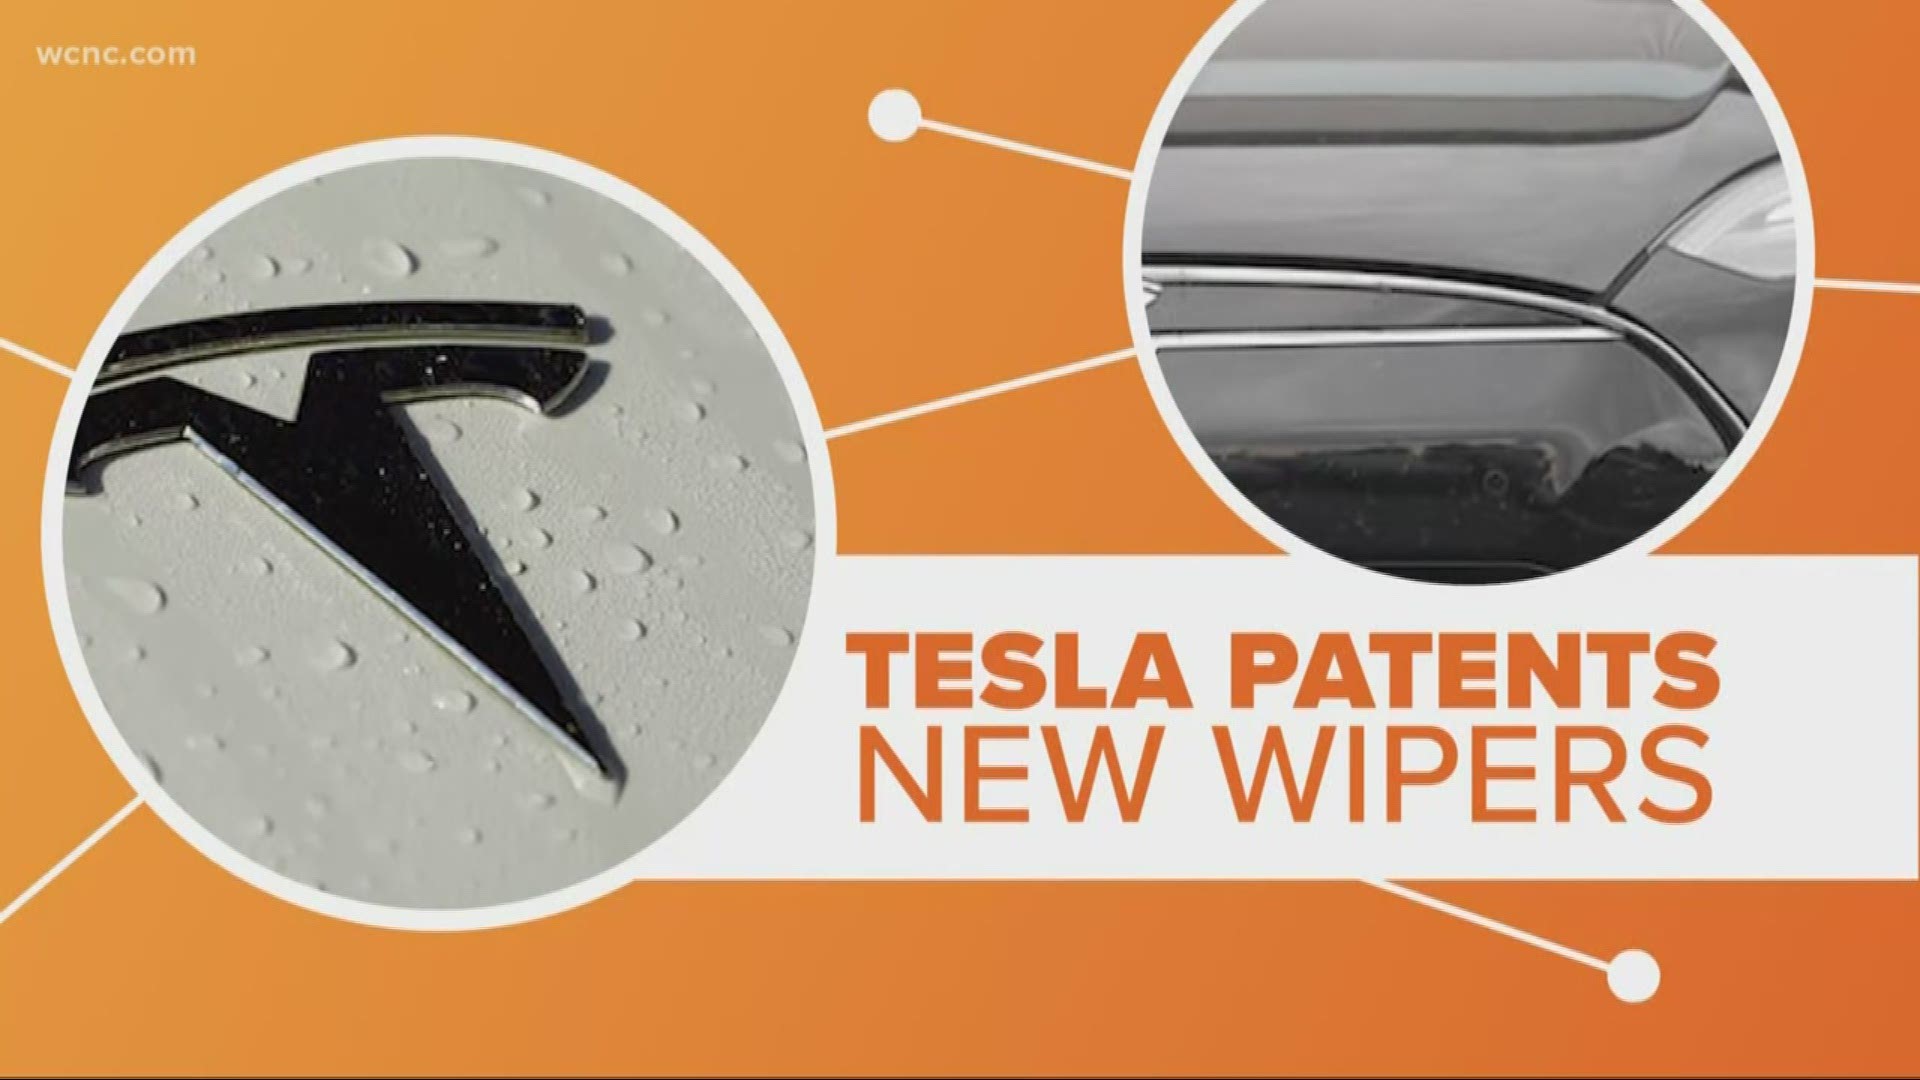 Tesla and Elon Musk are known for pushing the envelope when it comes to car technology. His latest creation hopes to make traditional wipers a thing of the past .